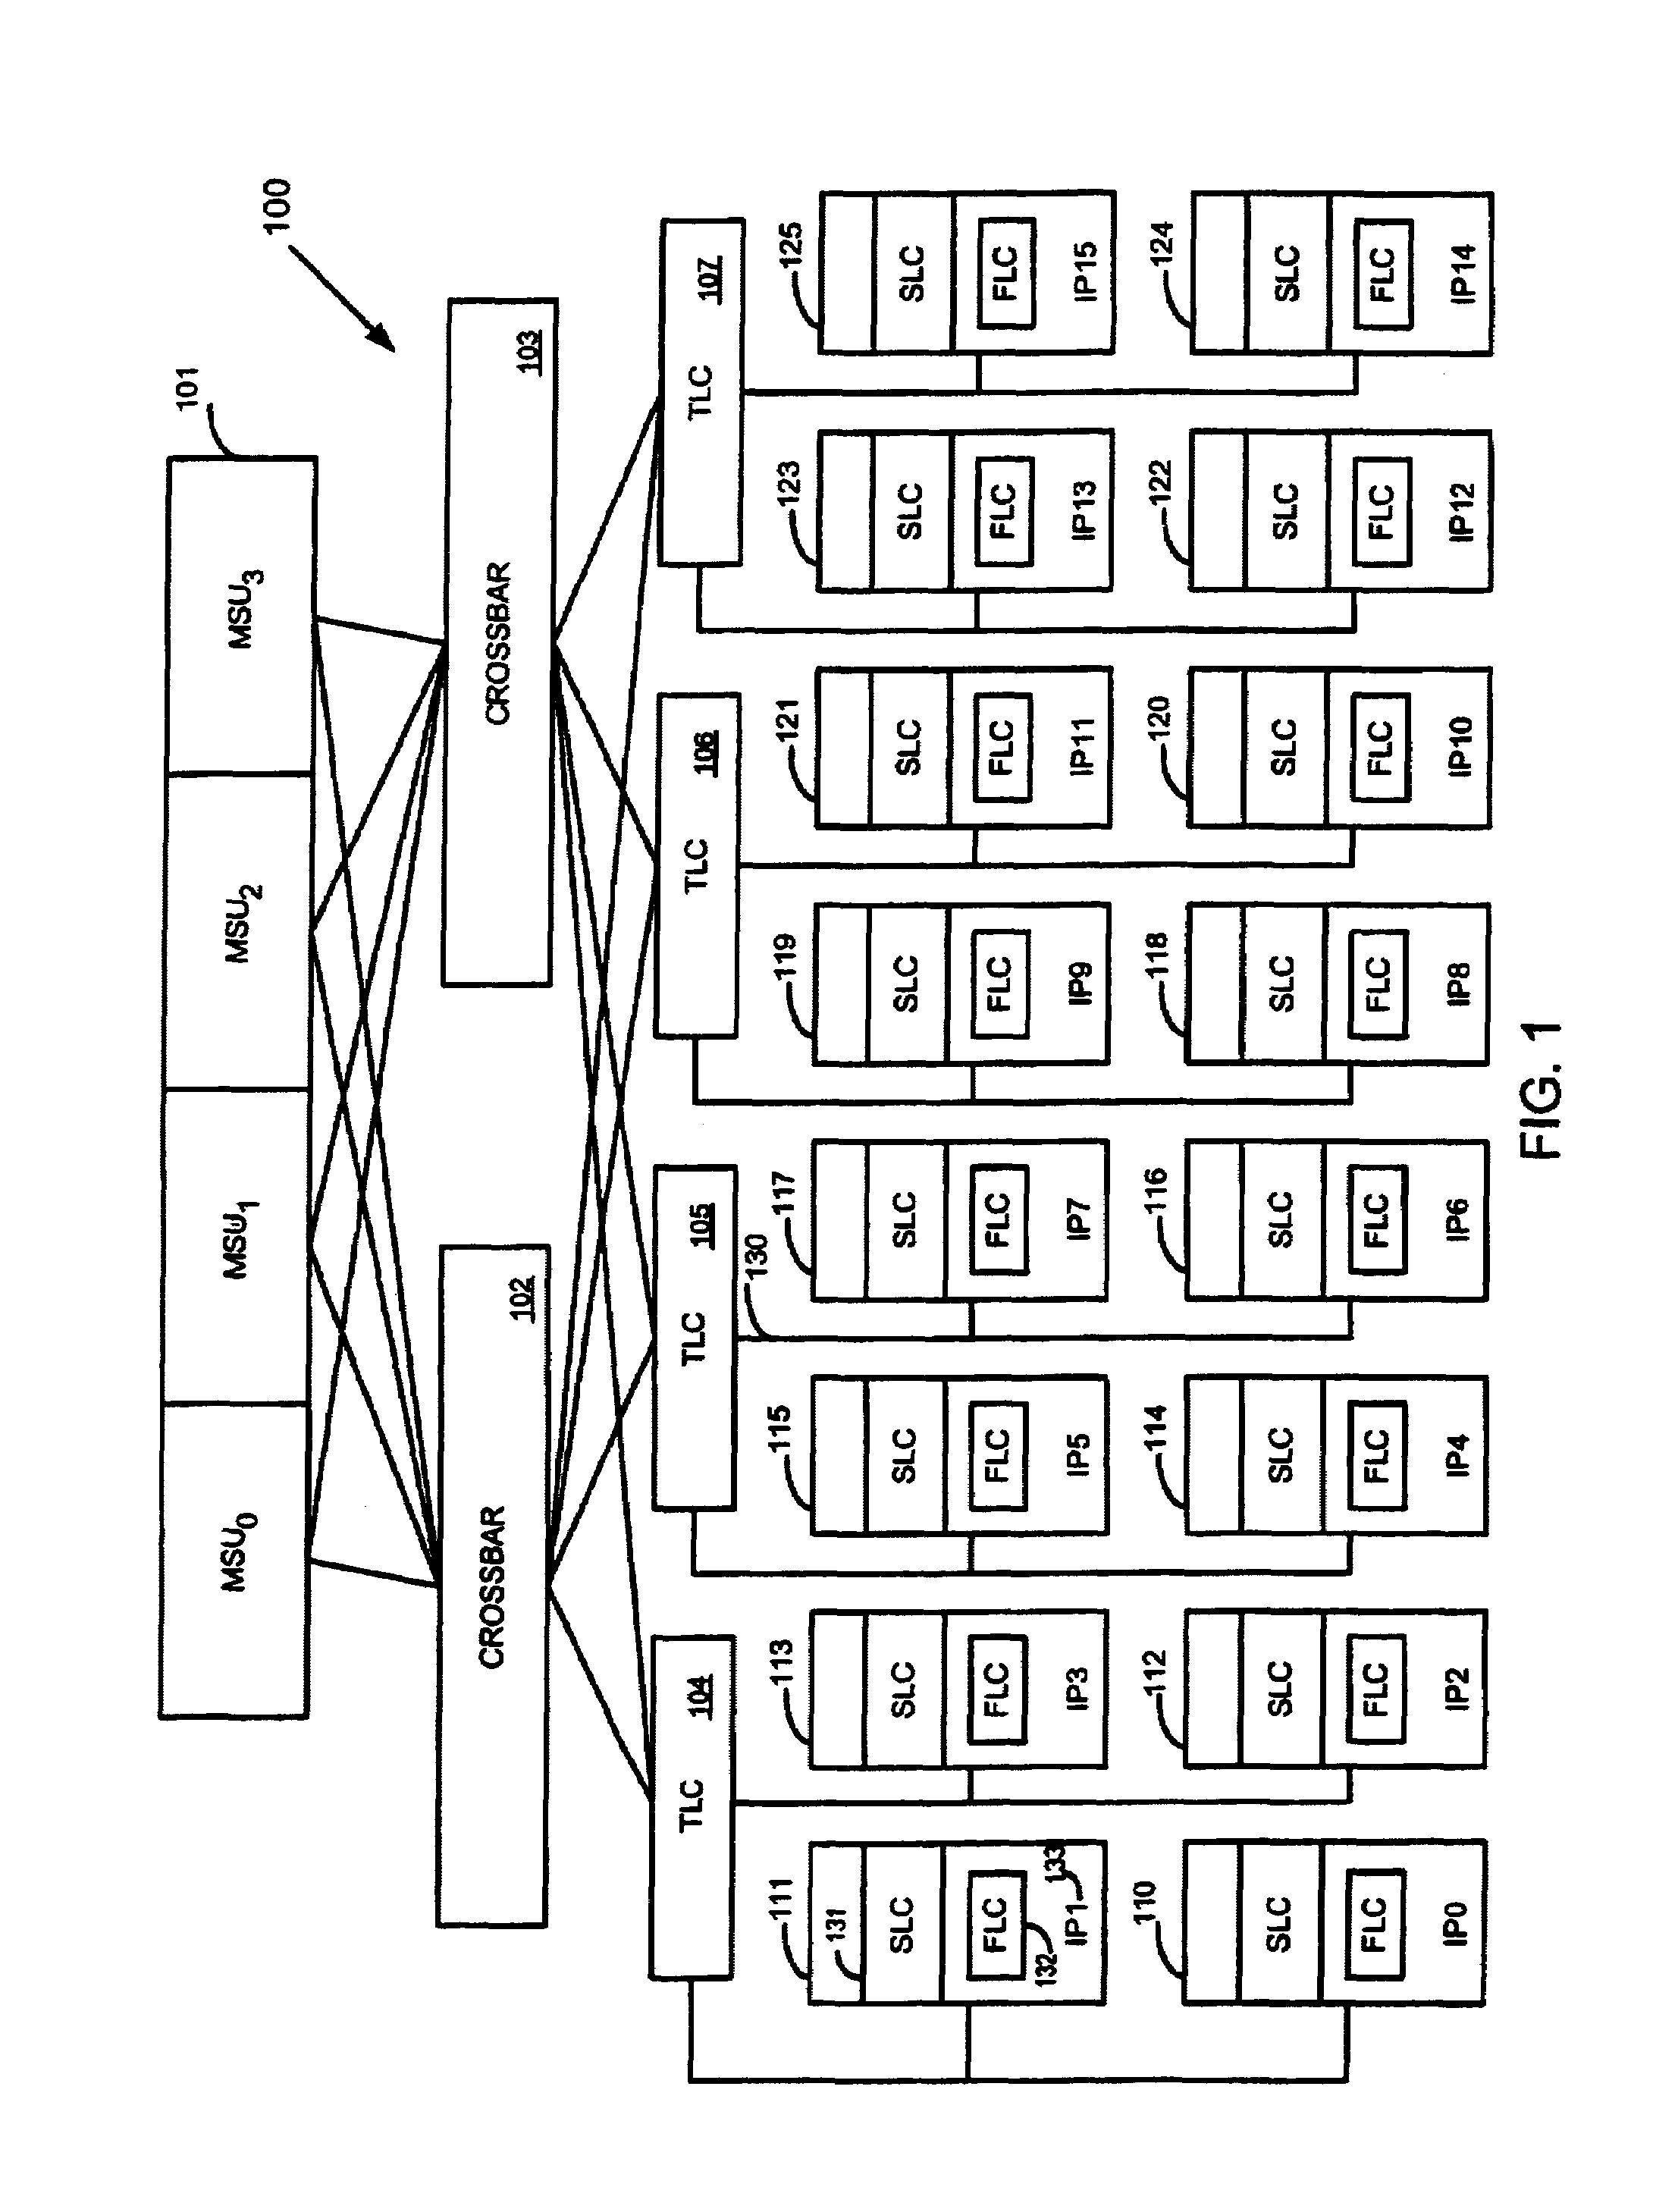 Hierarchical affinity dispatcher for task management in a multiprocessor computer system